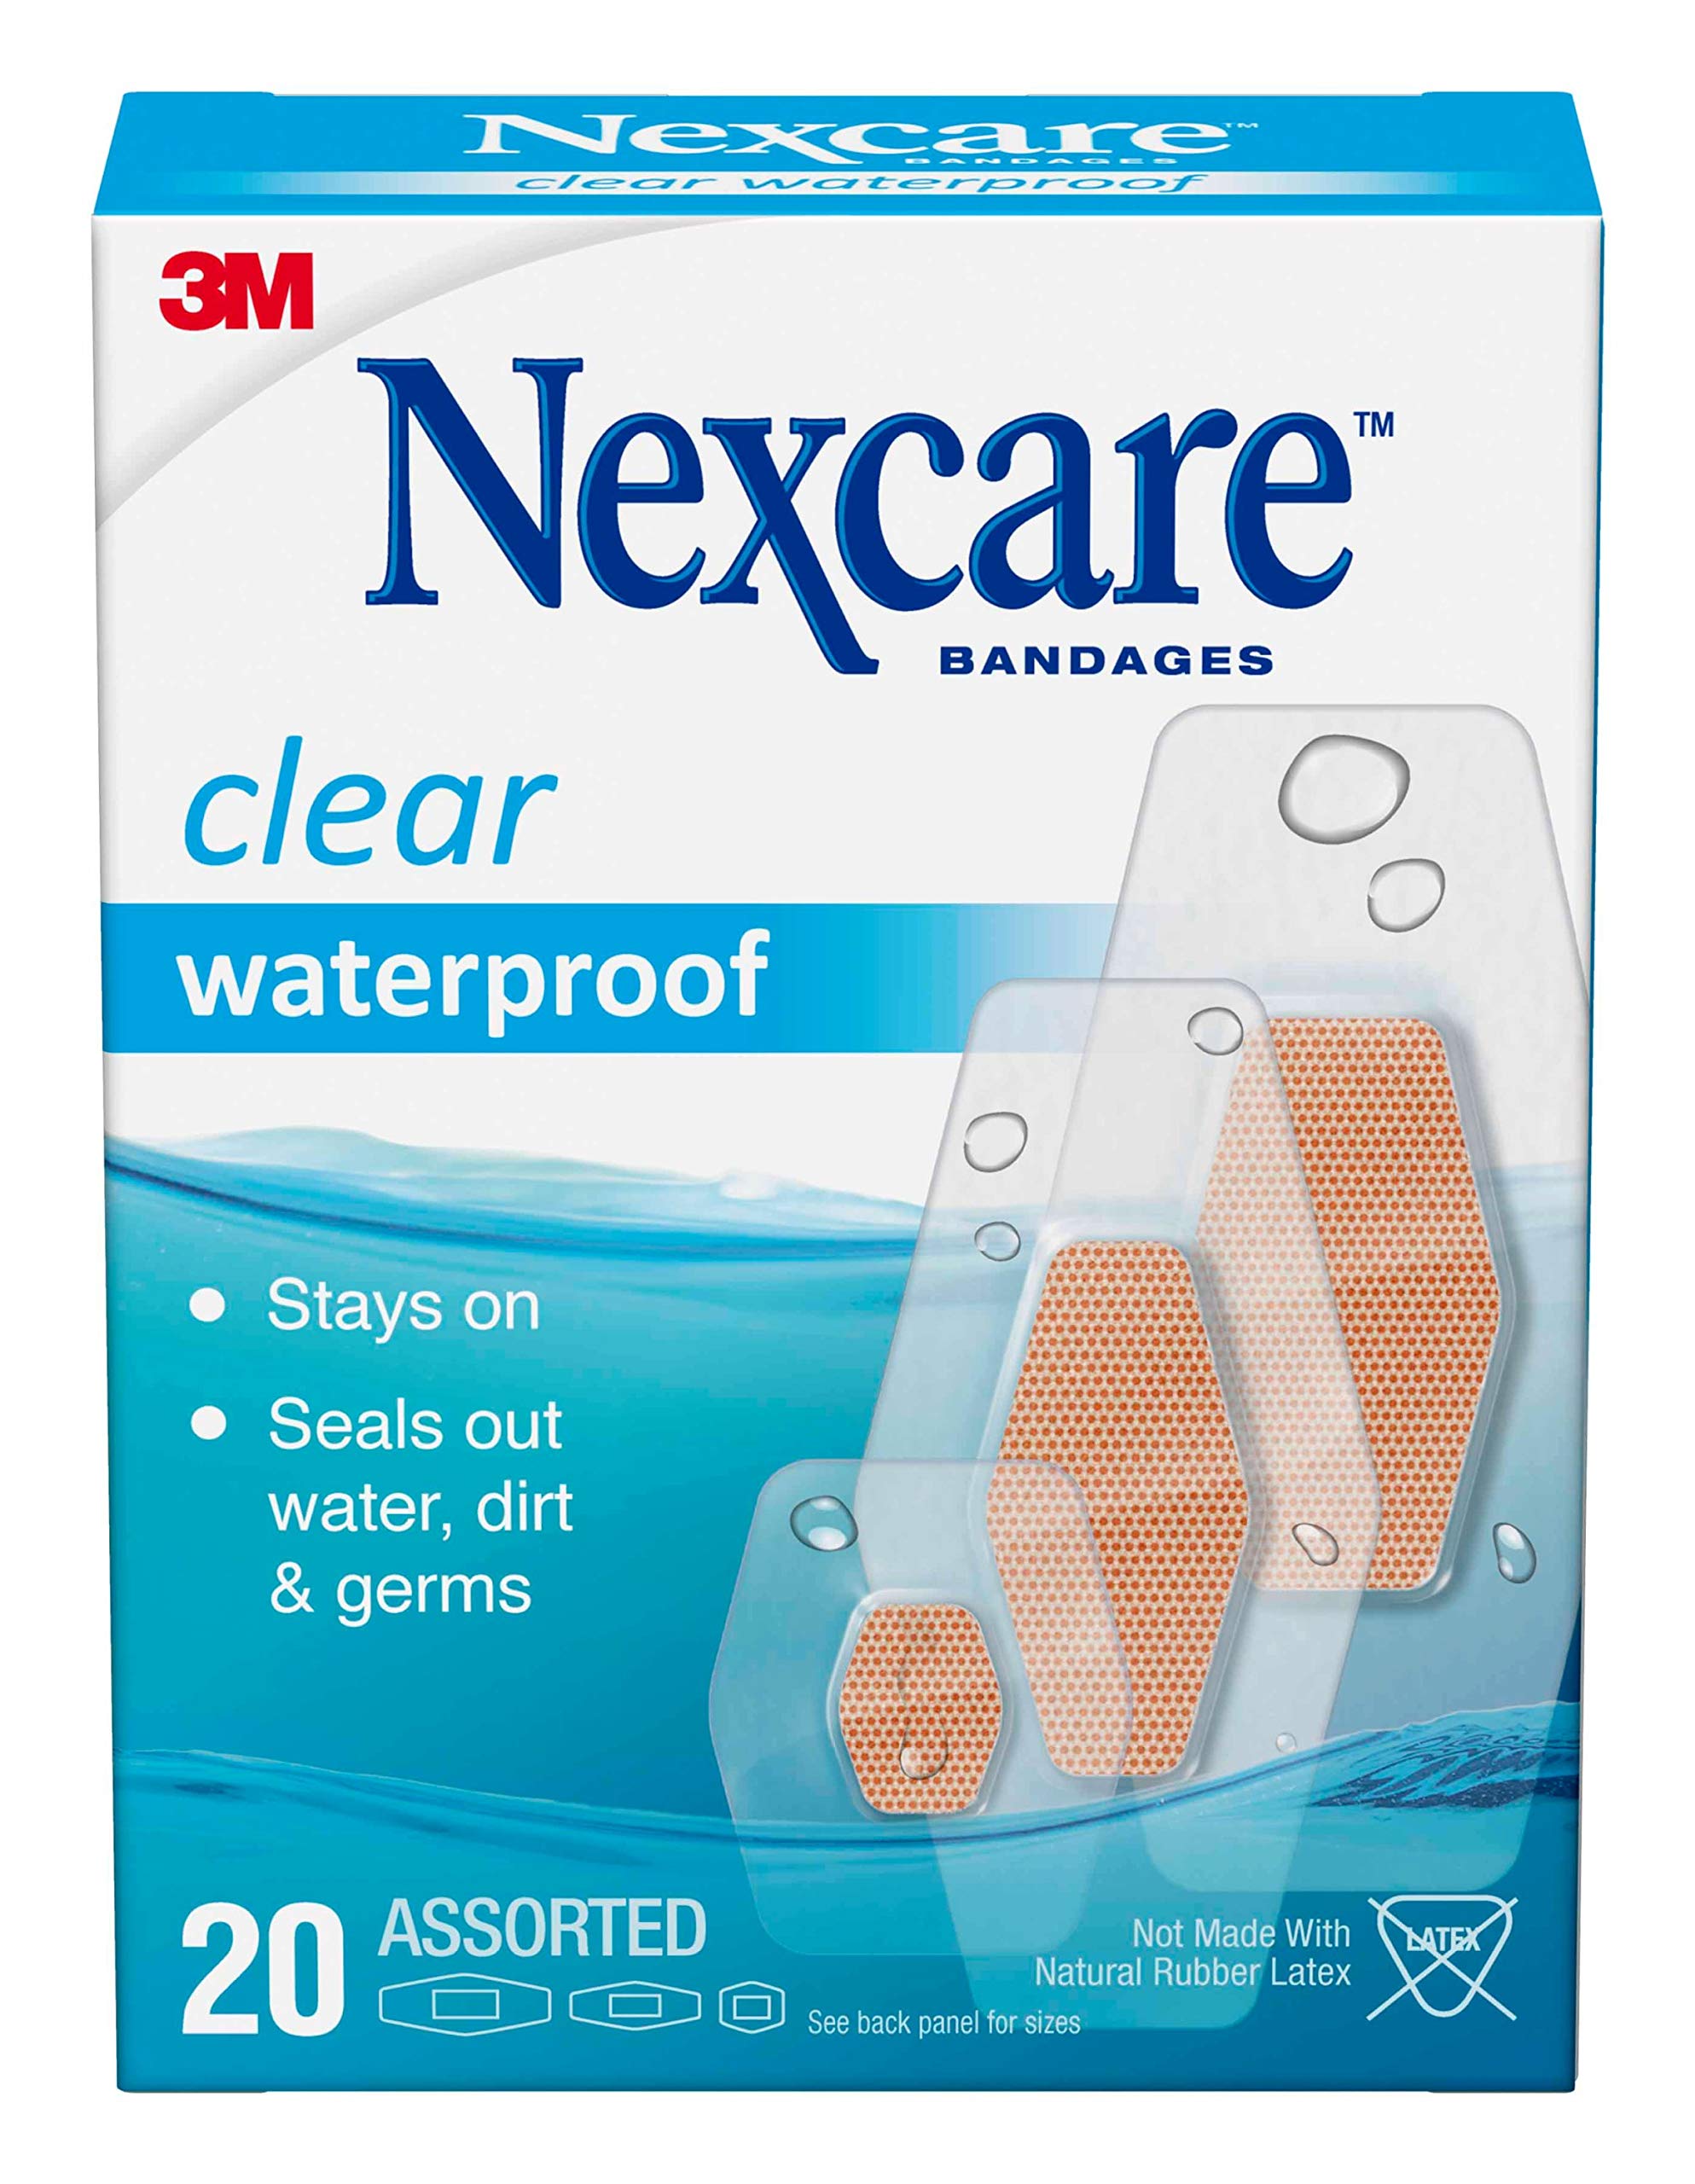 Nexcare Waterproof Clear Bandages, Covers And Protects, Designed To Stay On In Wet Conditions And Keep The Water Out, Assorted Sizes, 20 Count